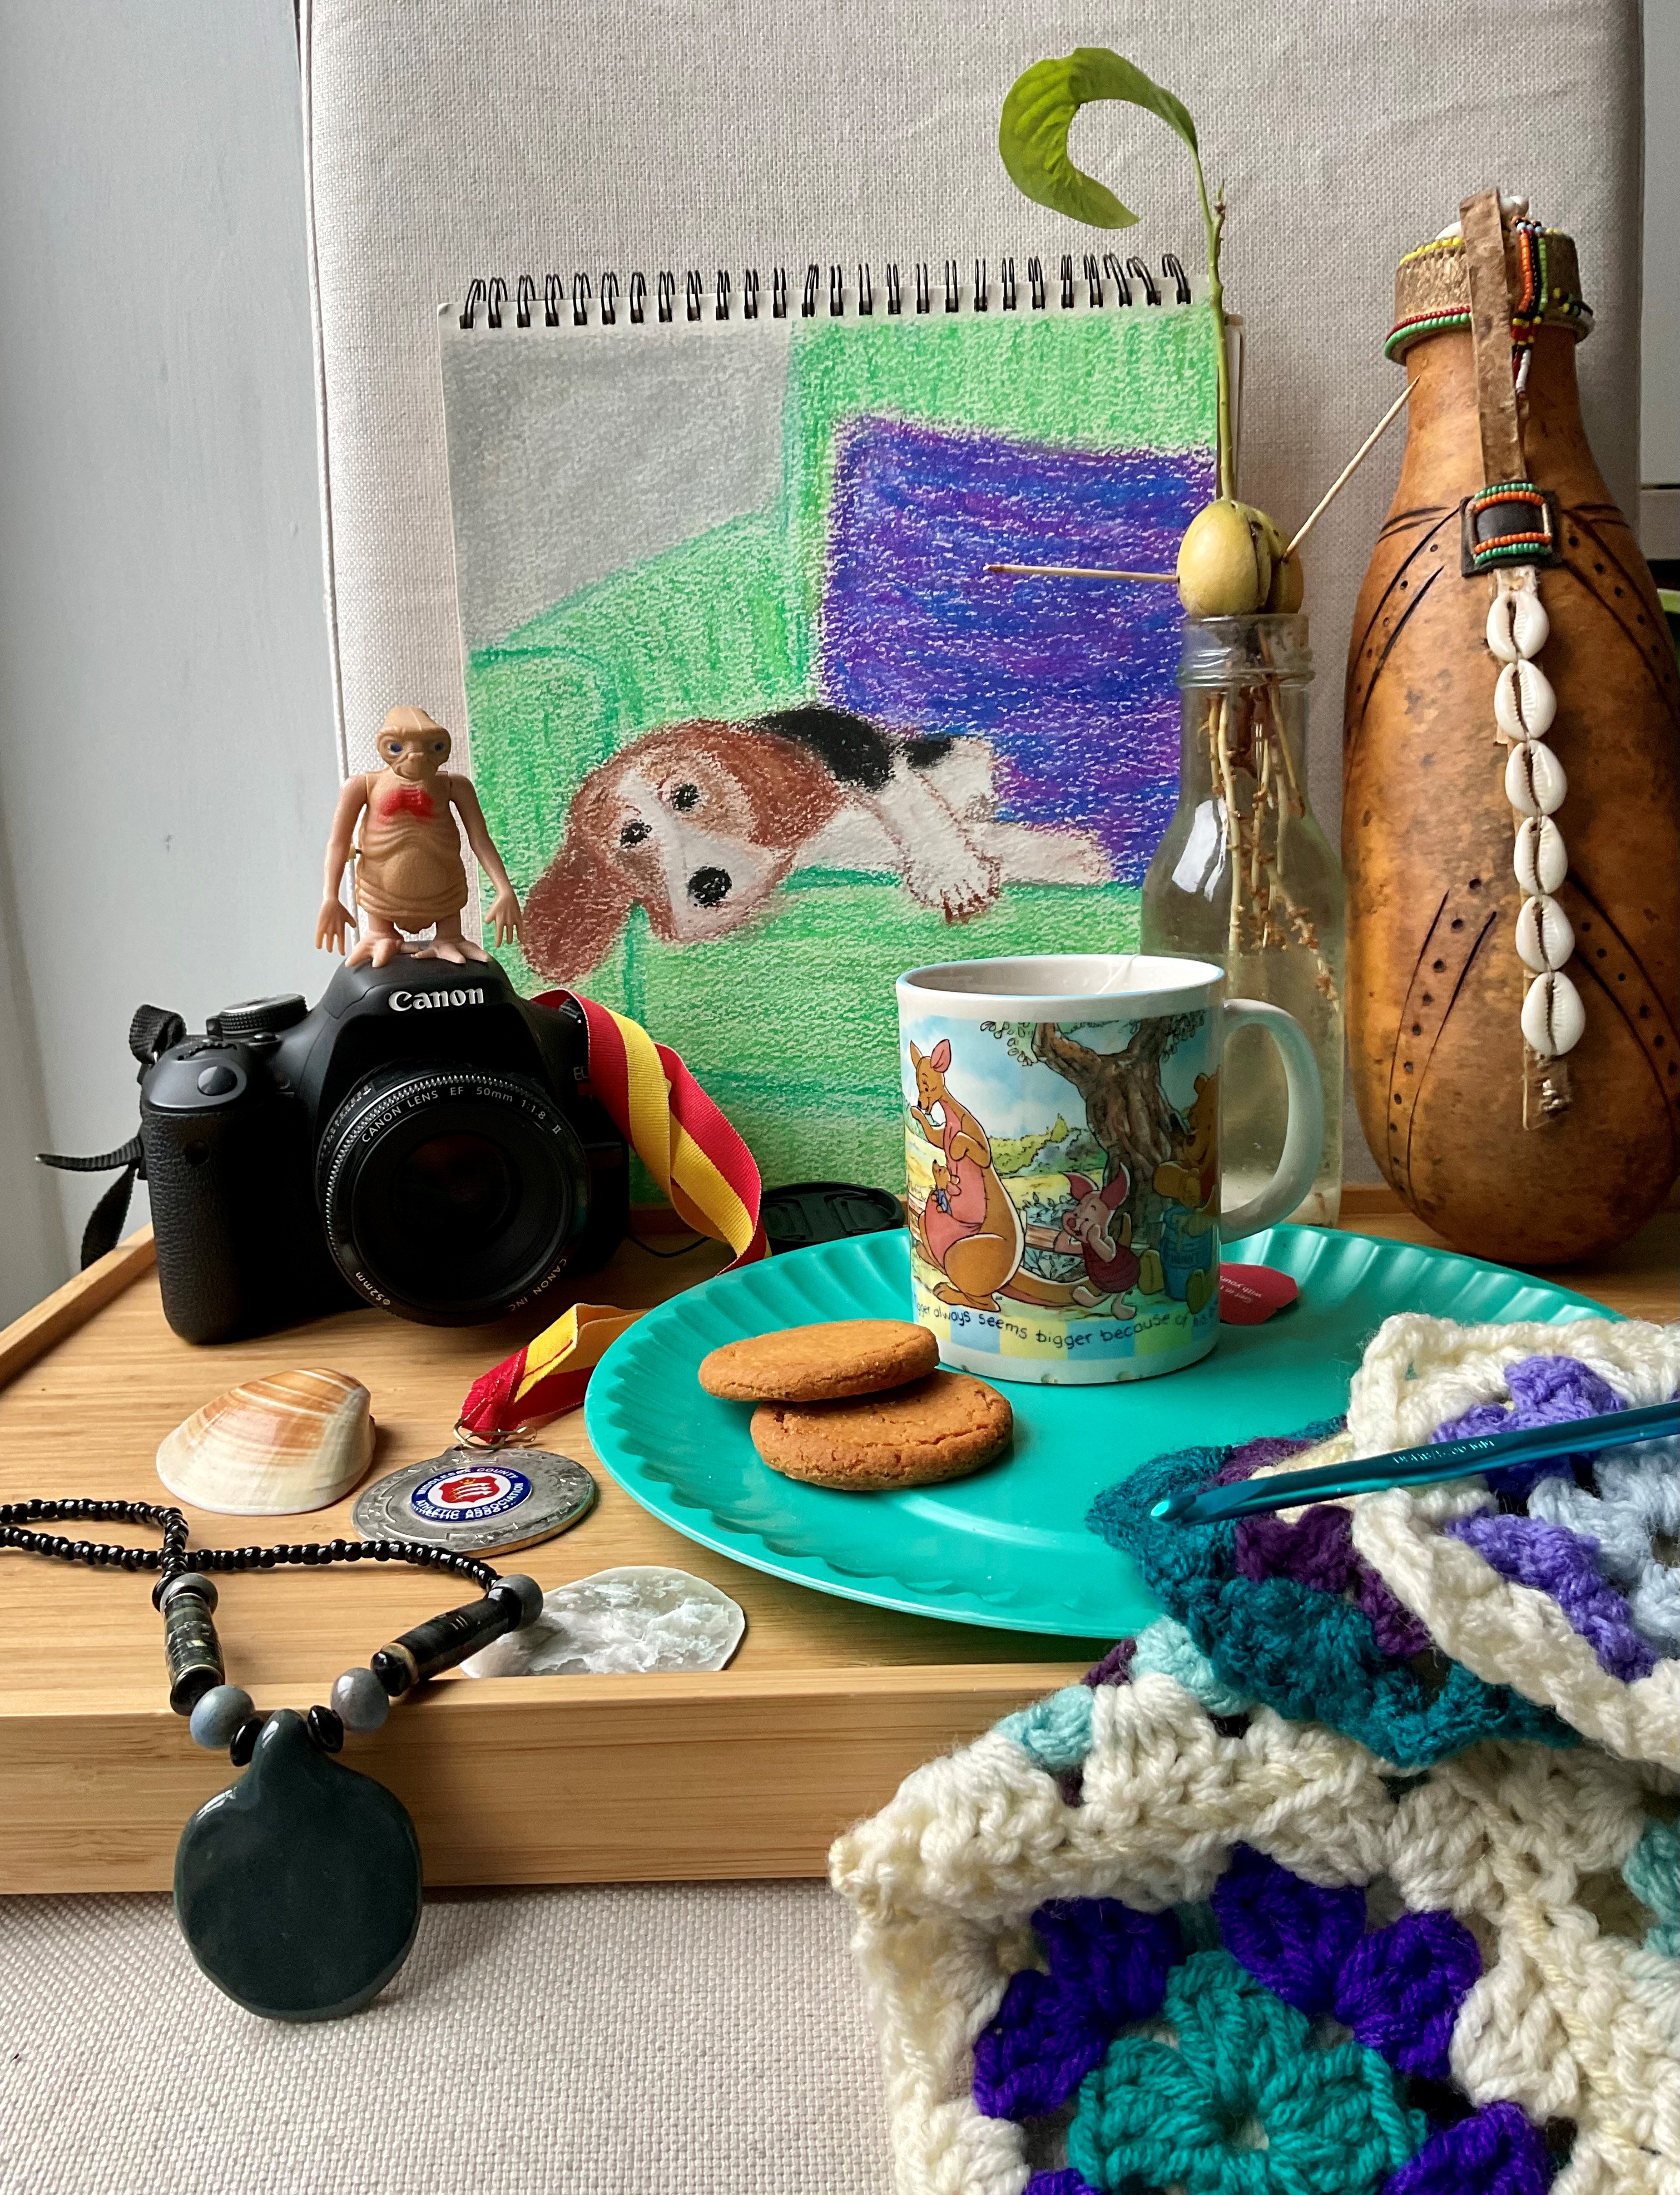 Assemblage of objects with a mug and biscuits